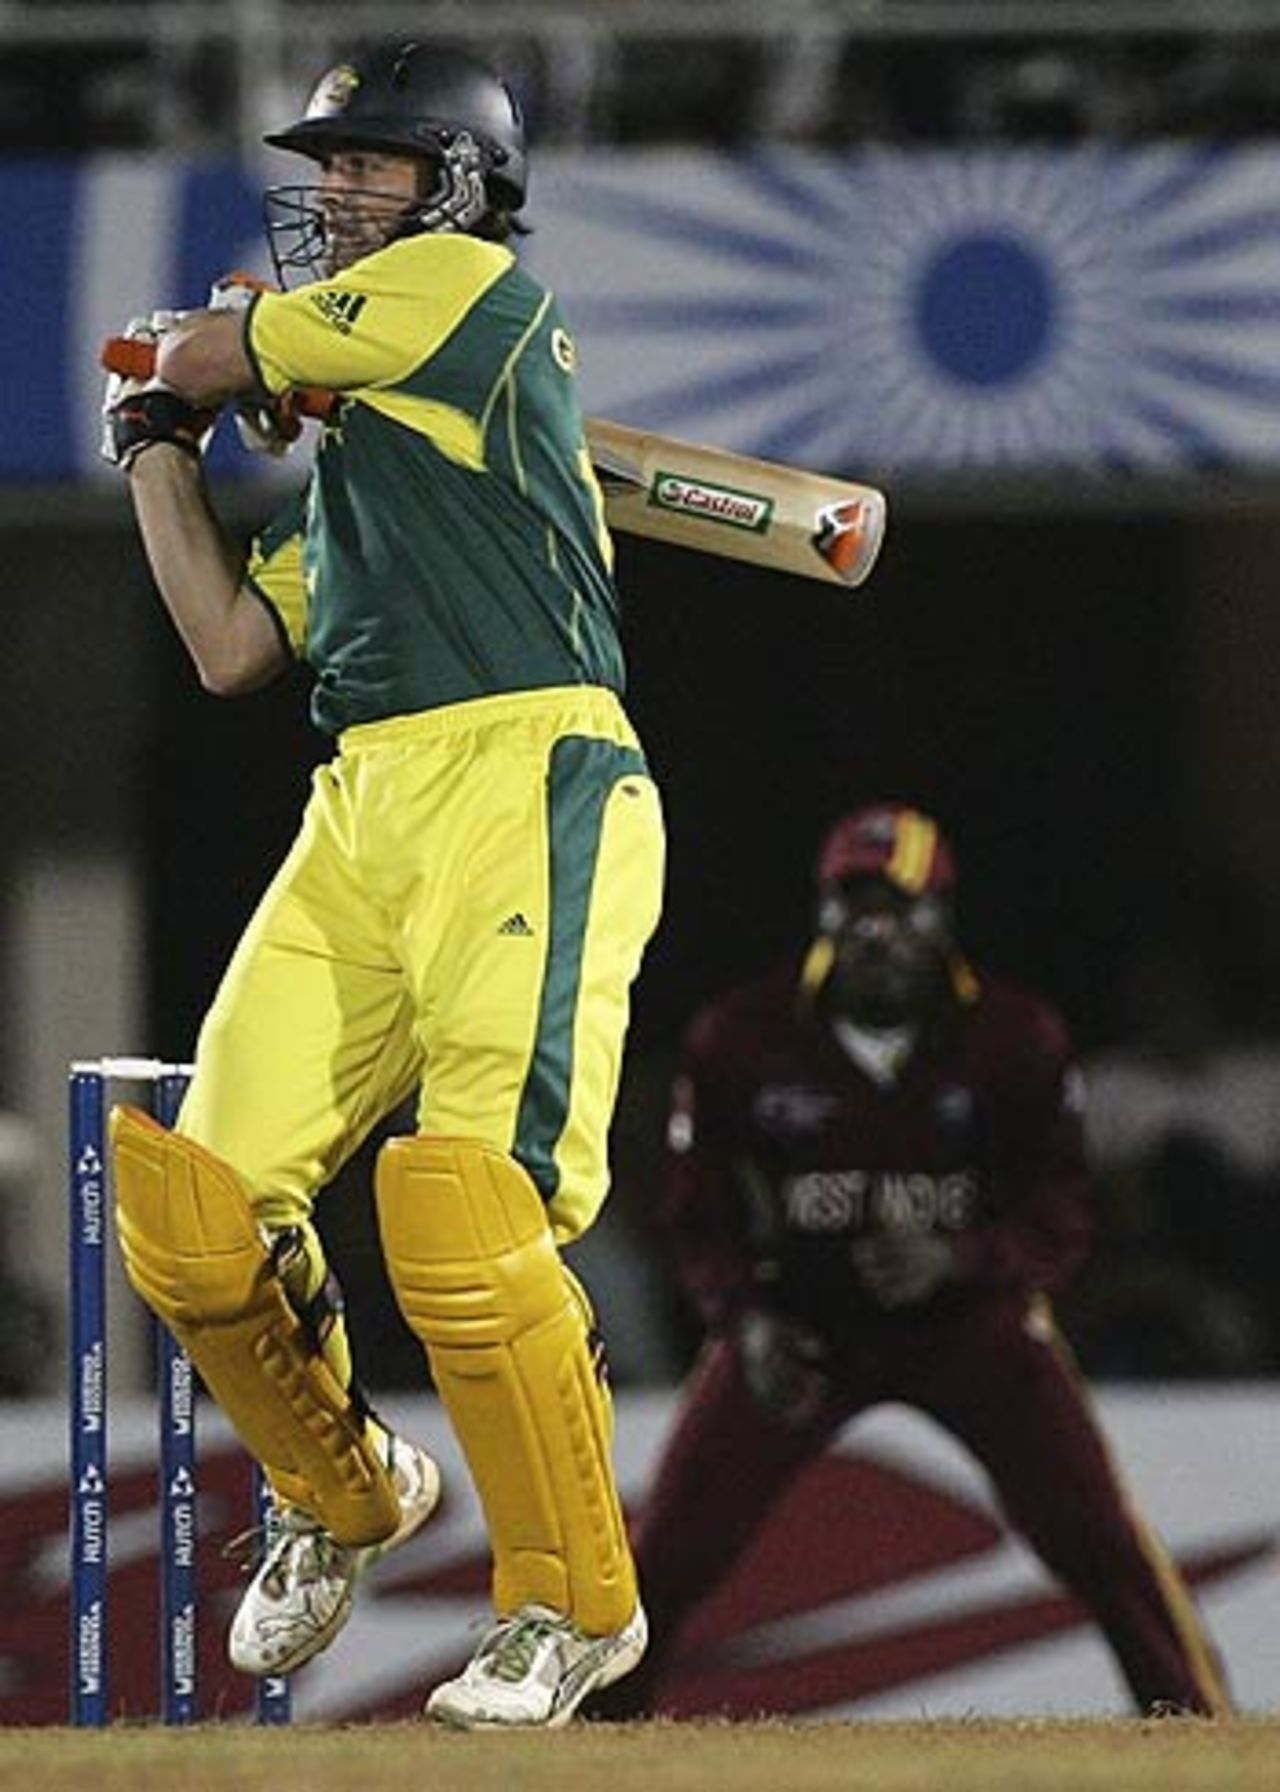 Adam Gilchrist picks the length early and smashes it past square leg, Australia v West Indies, 4th match, Mumbai, October 18, 2006